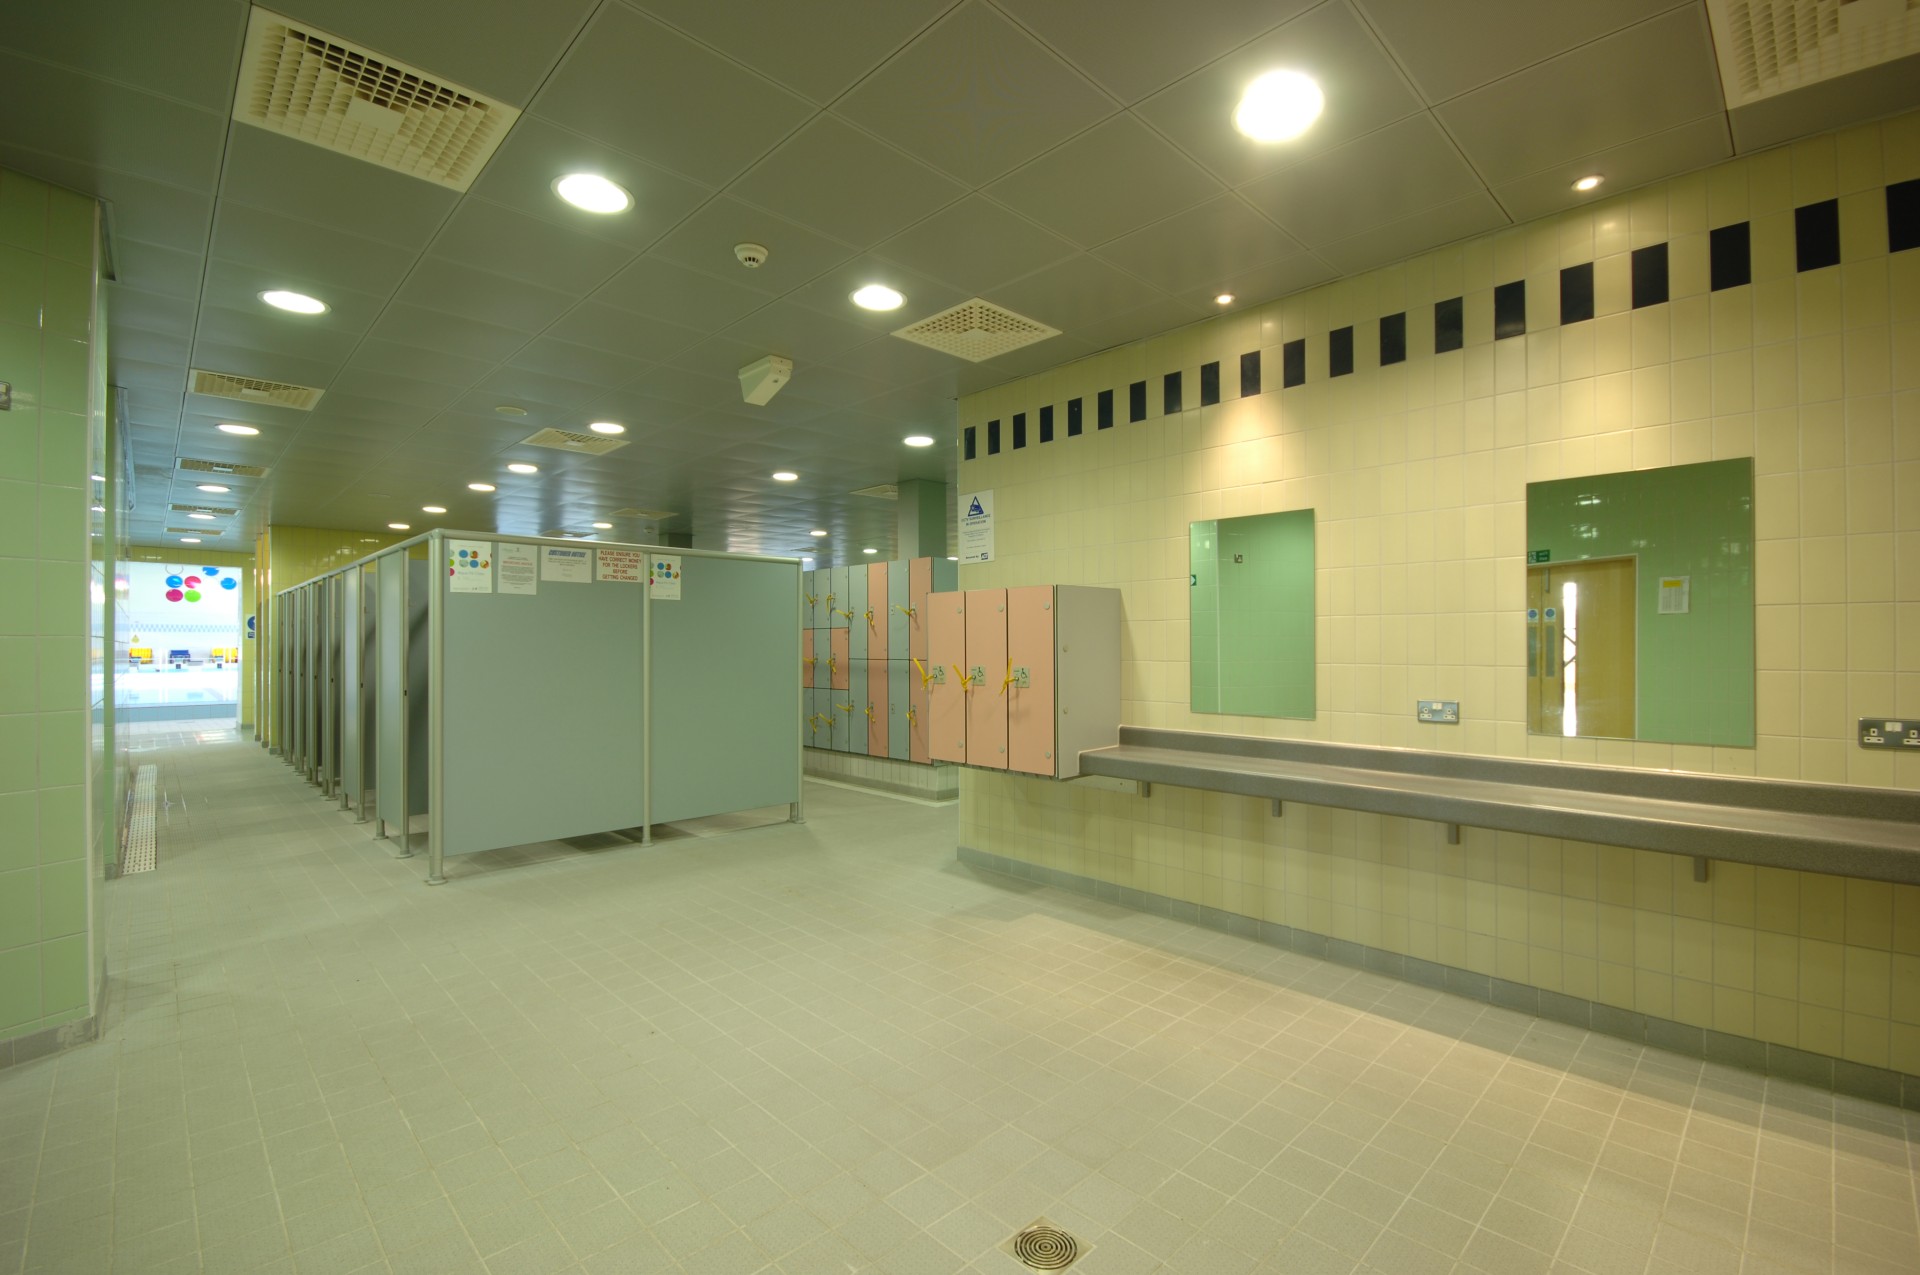 Pool changing rooms